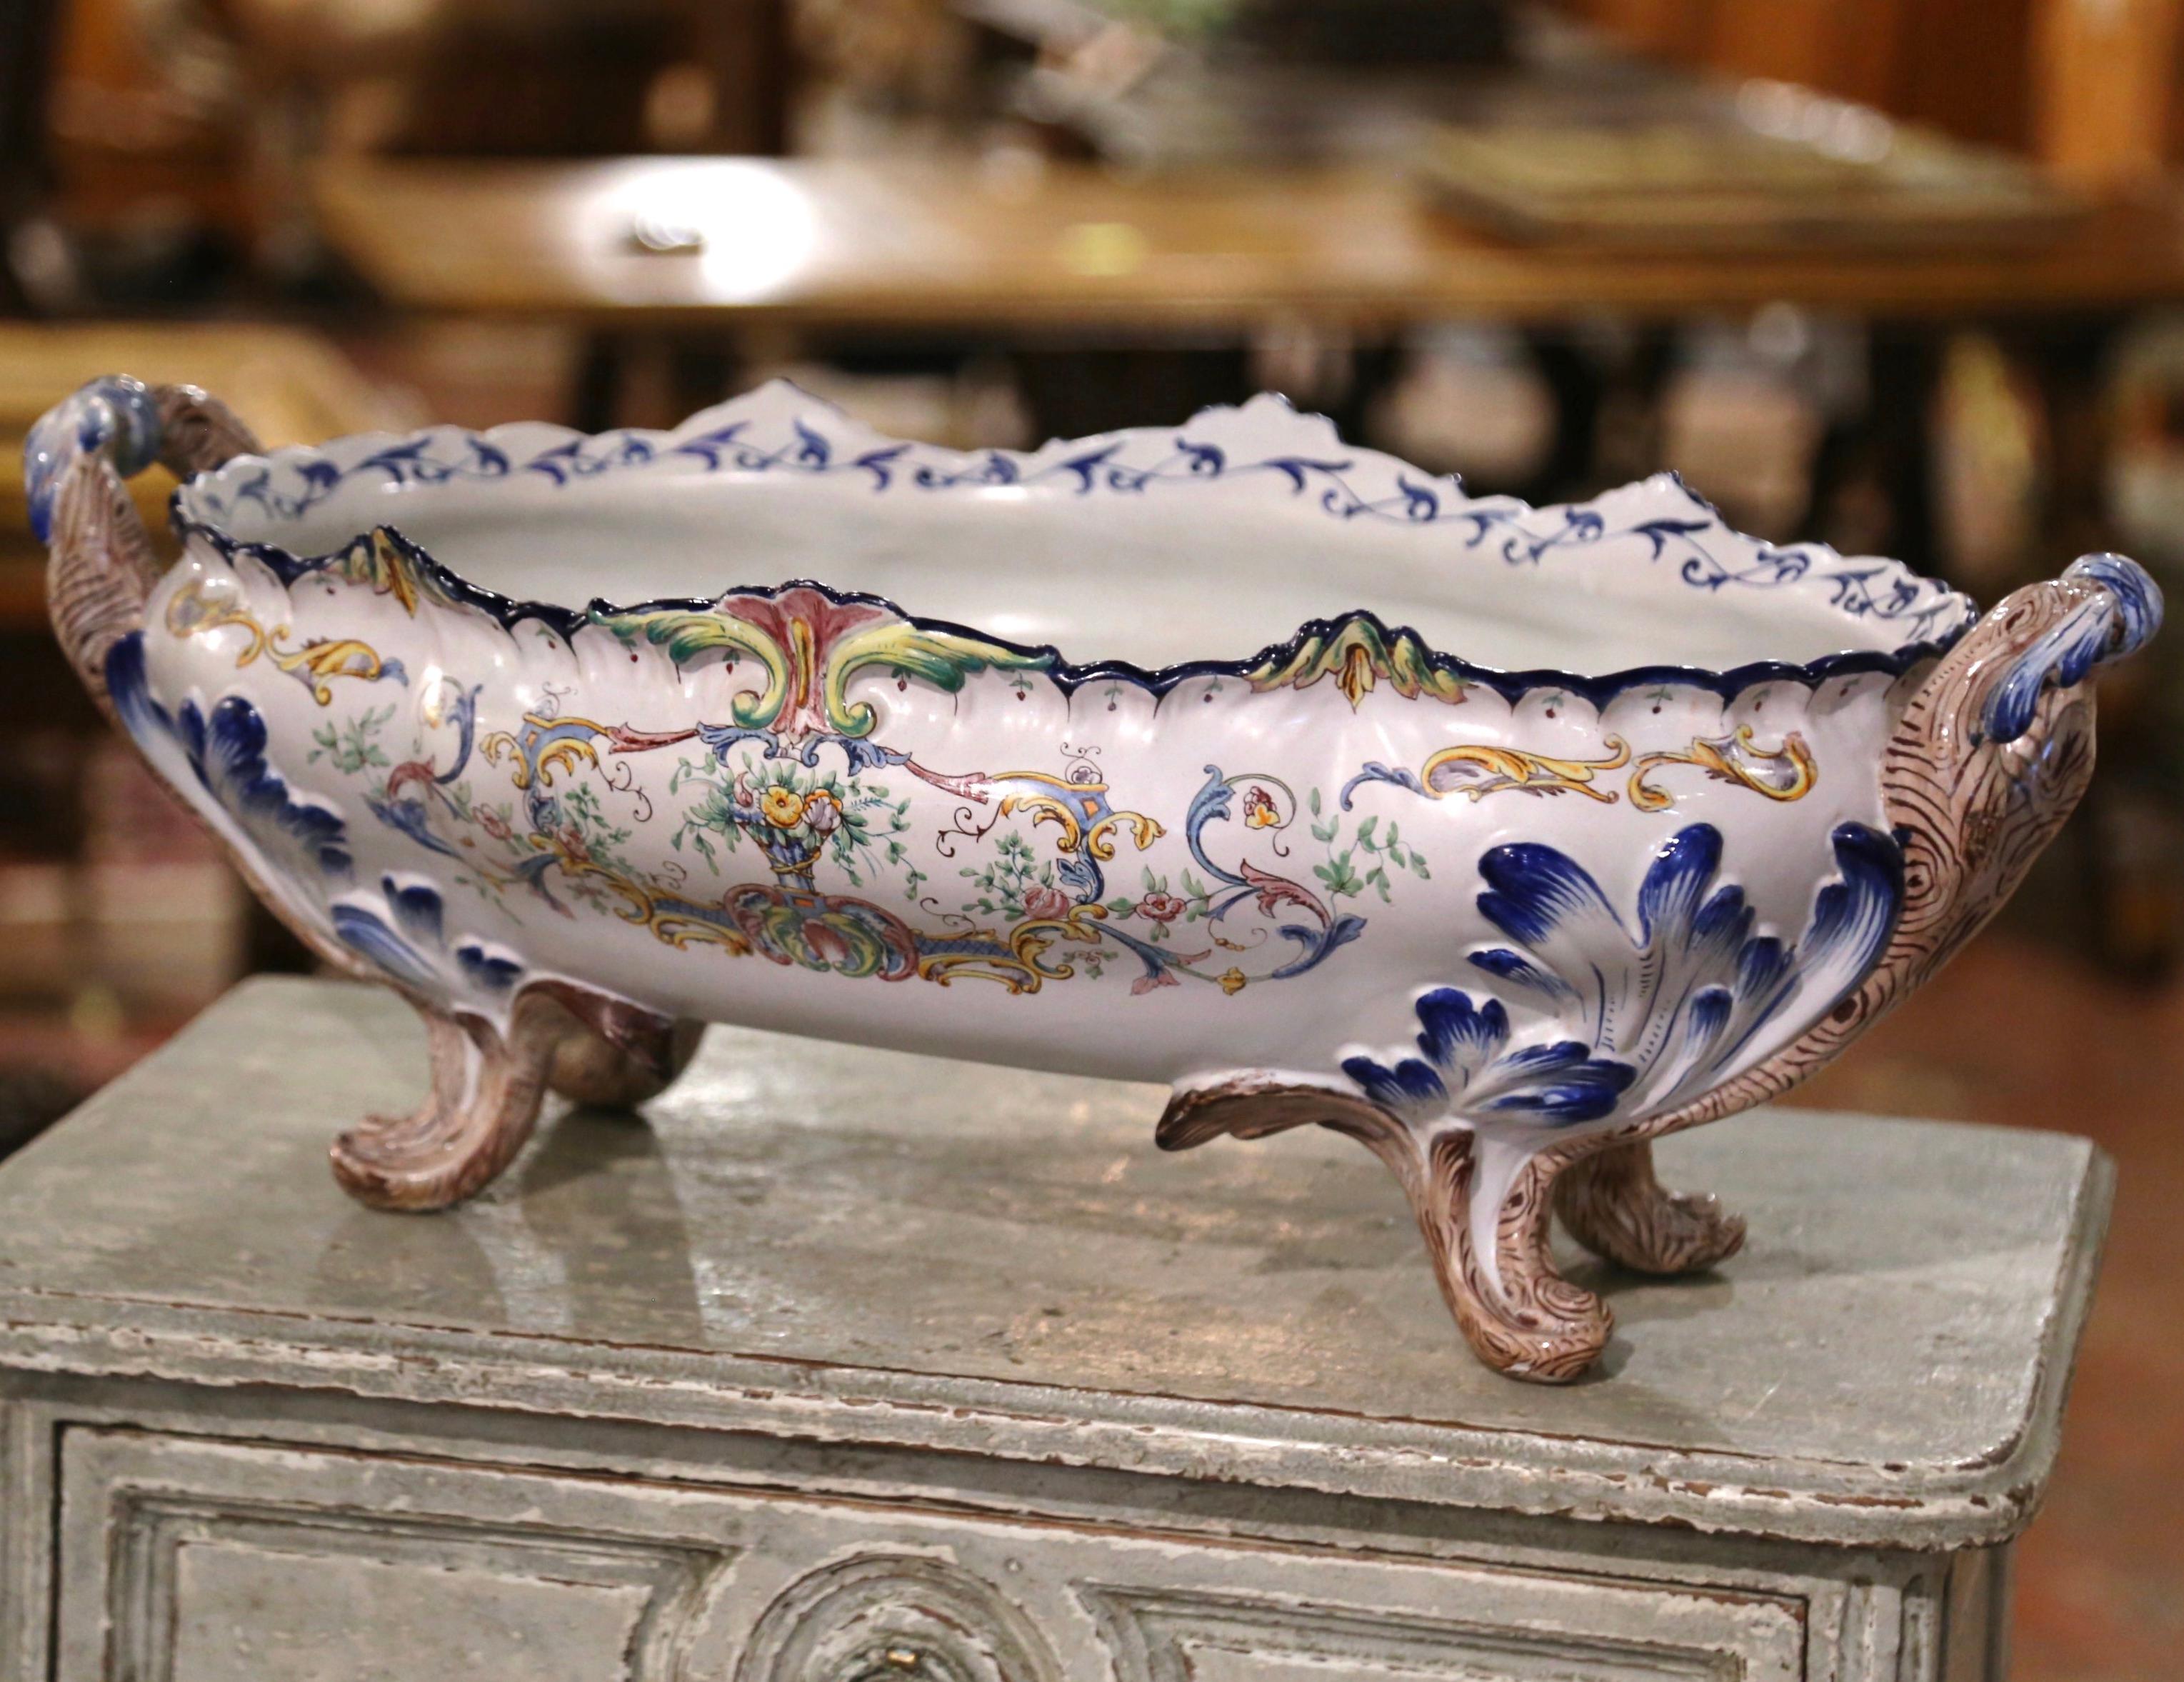 Crafted in Normandy, France, circa 1890, the large ceramic bombe planter sits on four scroll feet decorated with acanthus leaves. The shallow, detailed planter dressed with elegant scrolled rope-form side handles, features a scalloped rim around the